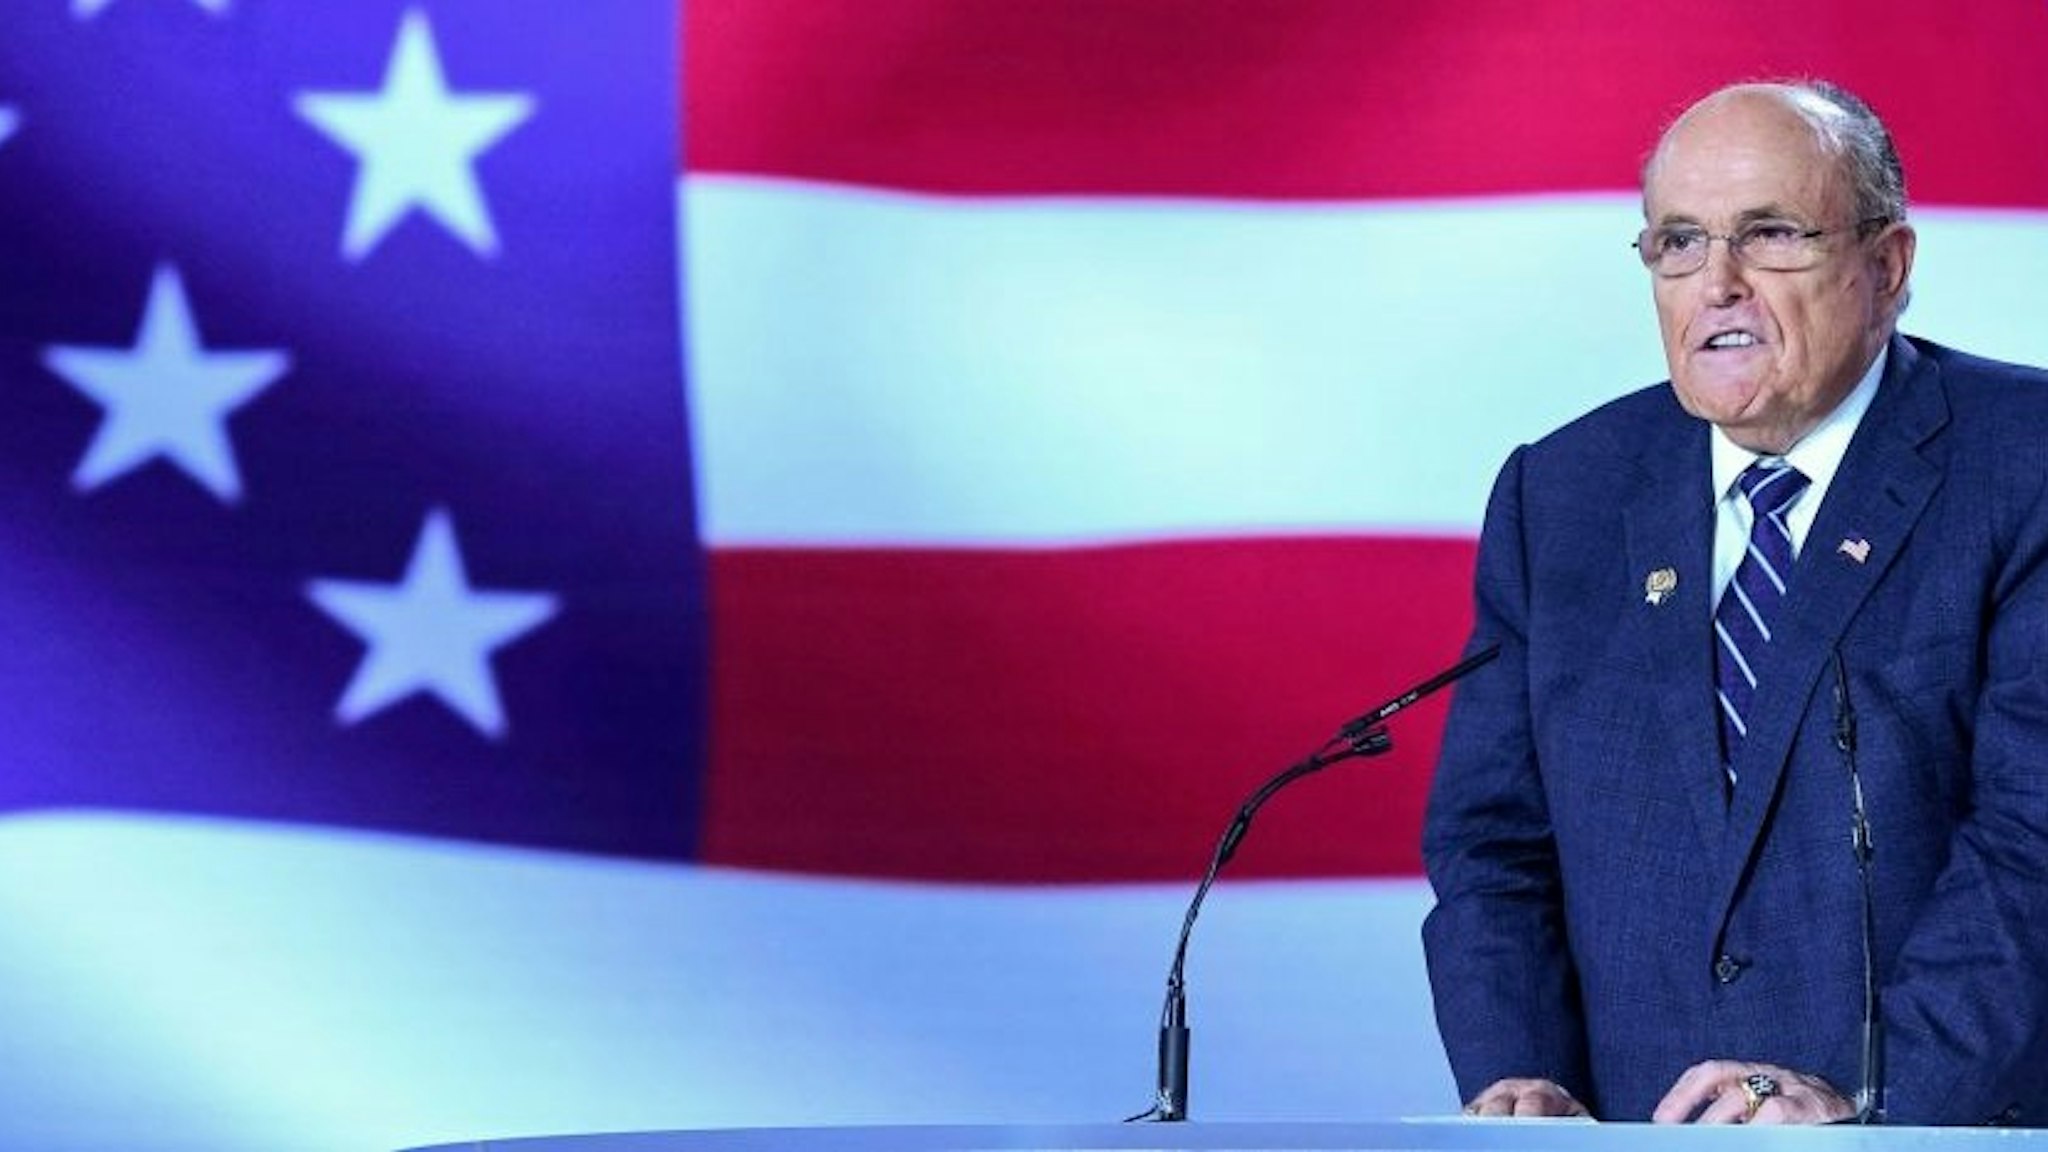 Former Mayor of New York City Rudy Giuliani gestures as he speaks during a conference "120 Years of Struggle for Freedom Iran" at Ashraf-3 camp, which is a base for the People's Mojahedin Organization of Iran (MEK) in Albanian town of Manza, on July 13, 2019.